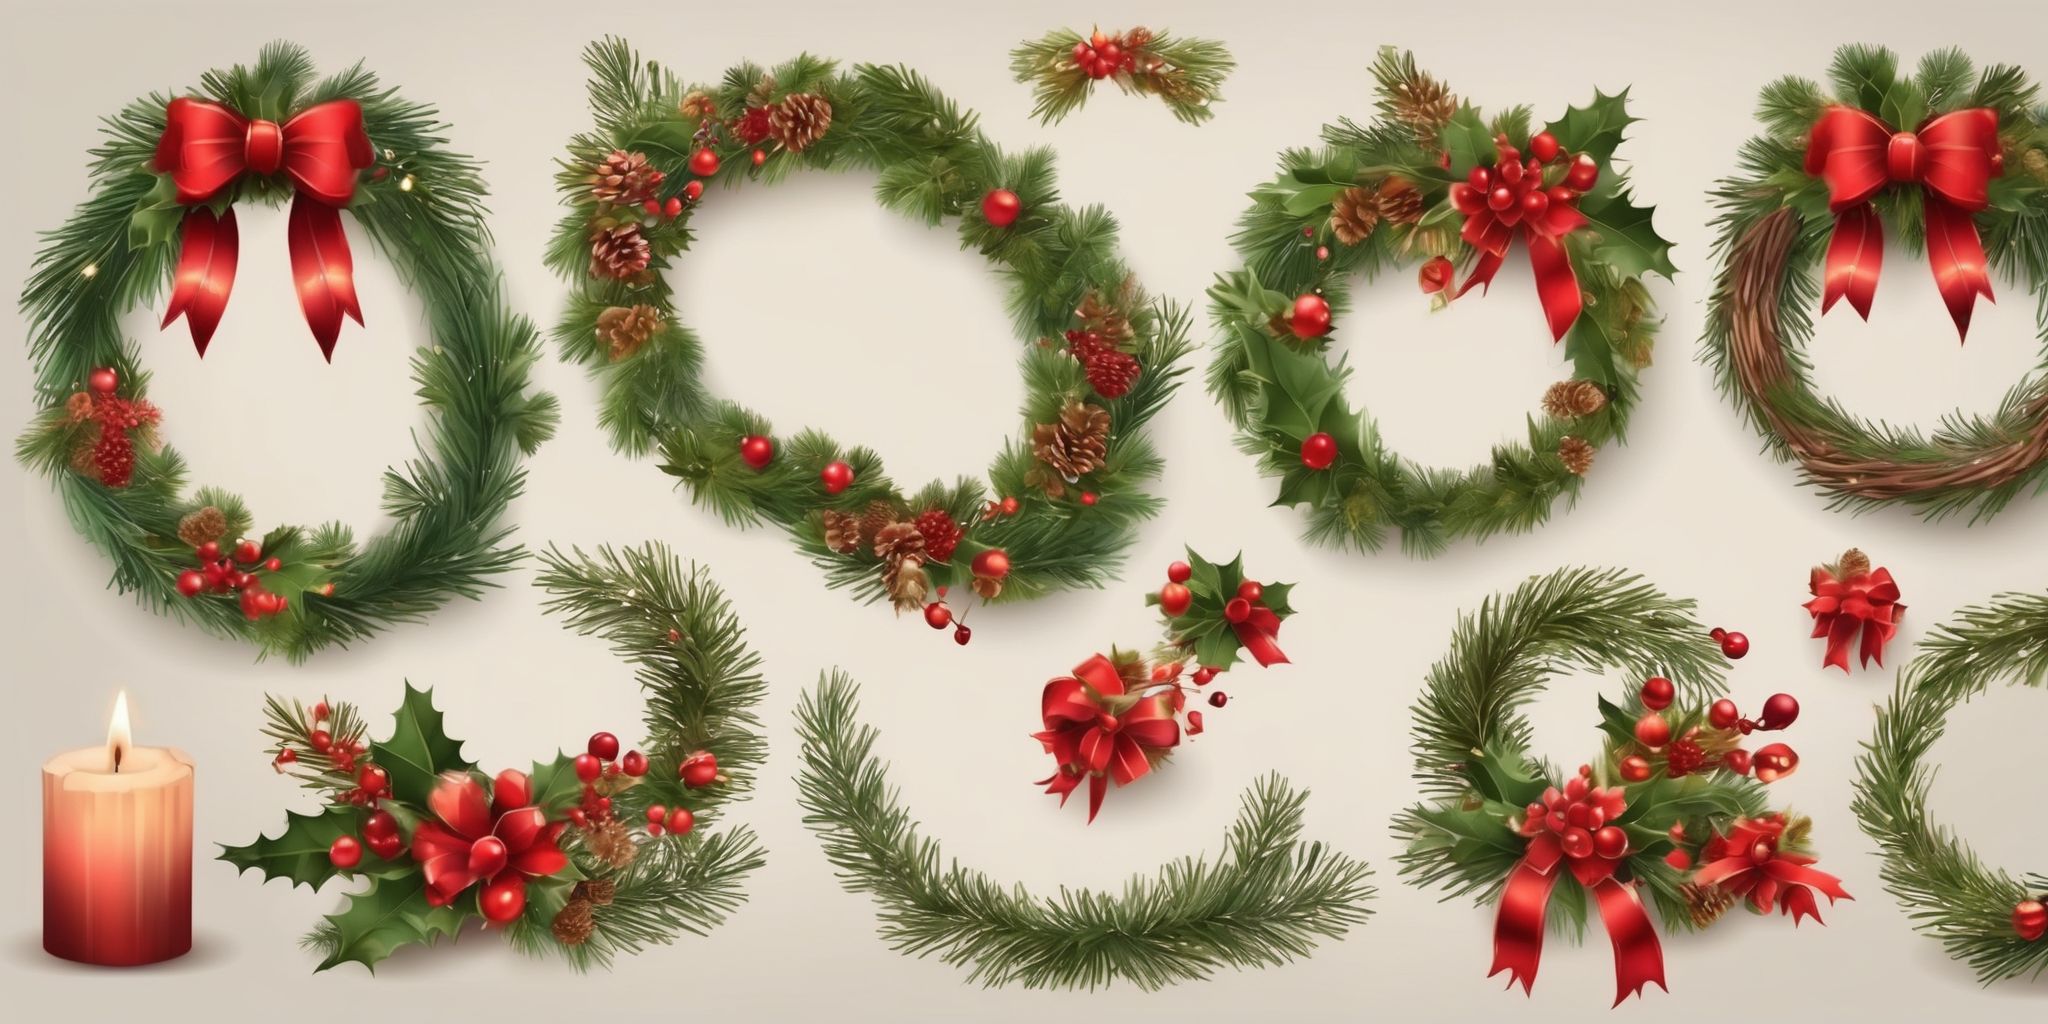 Festive wreaths in realistic Christmas style